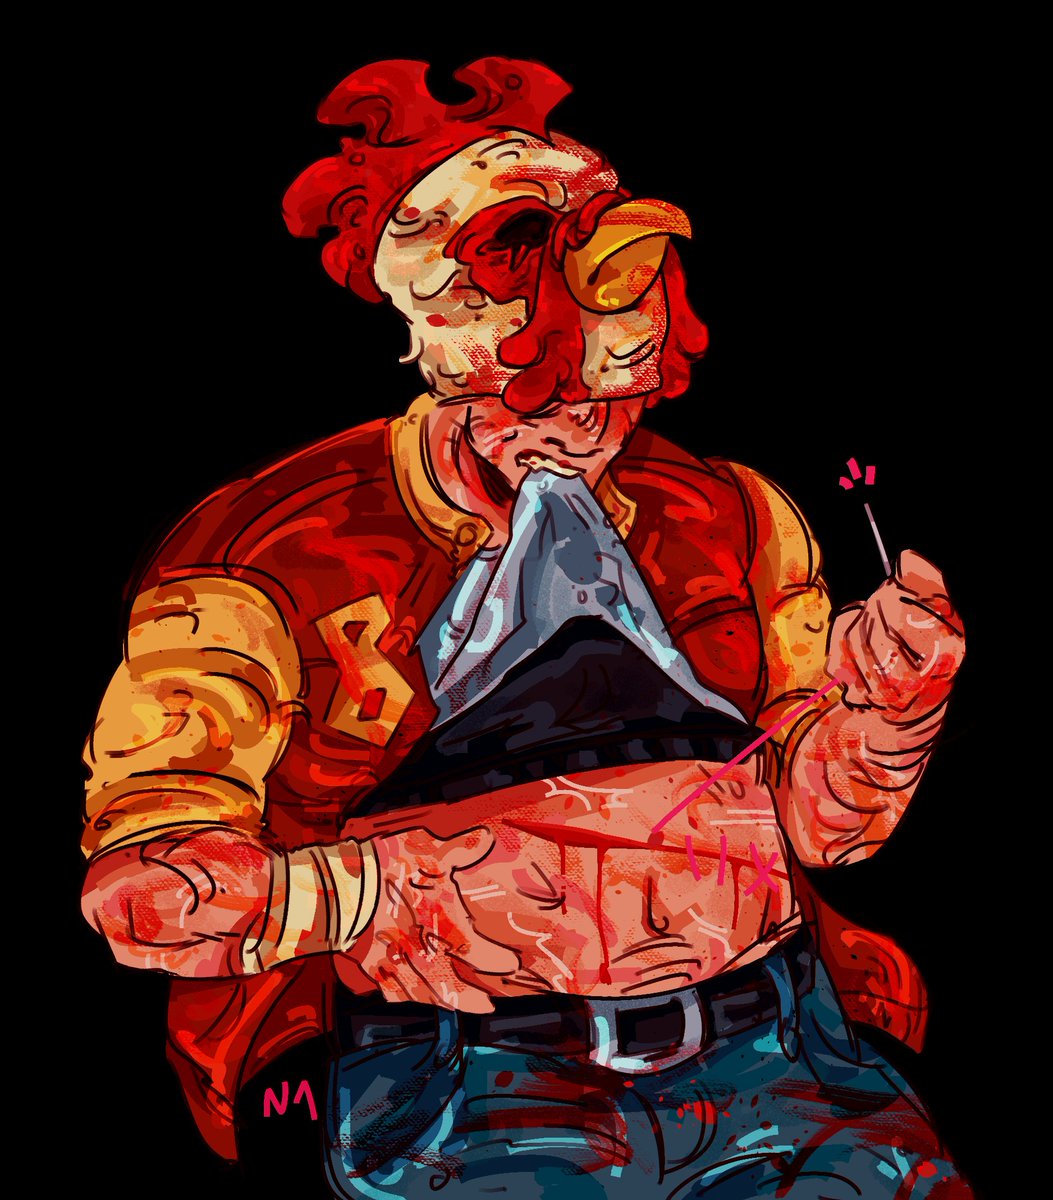 Phone hom aftermath #hotlinemiami